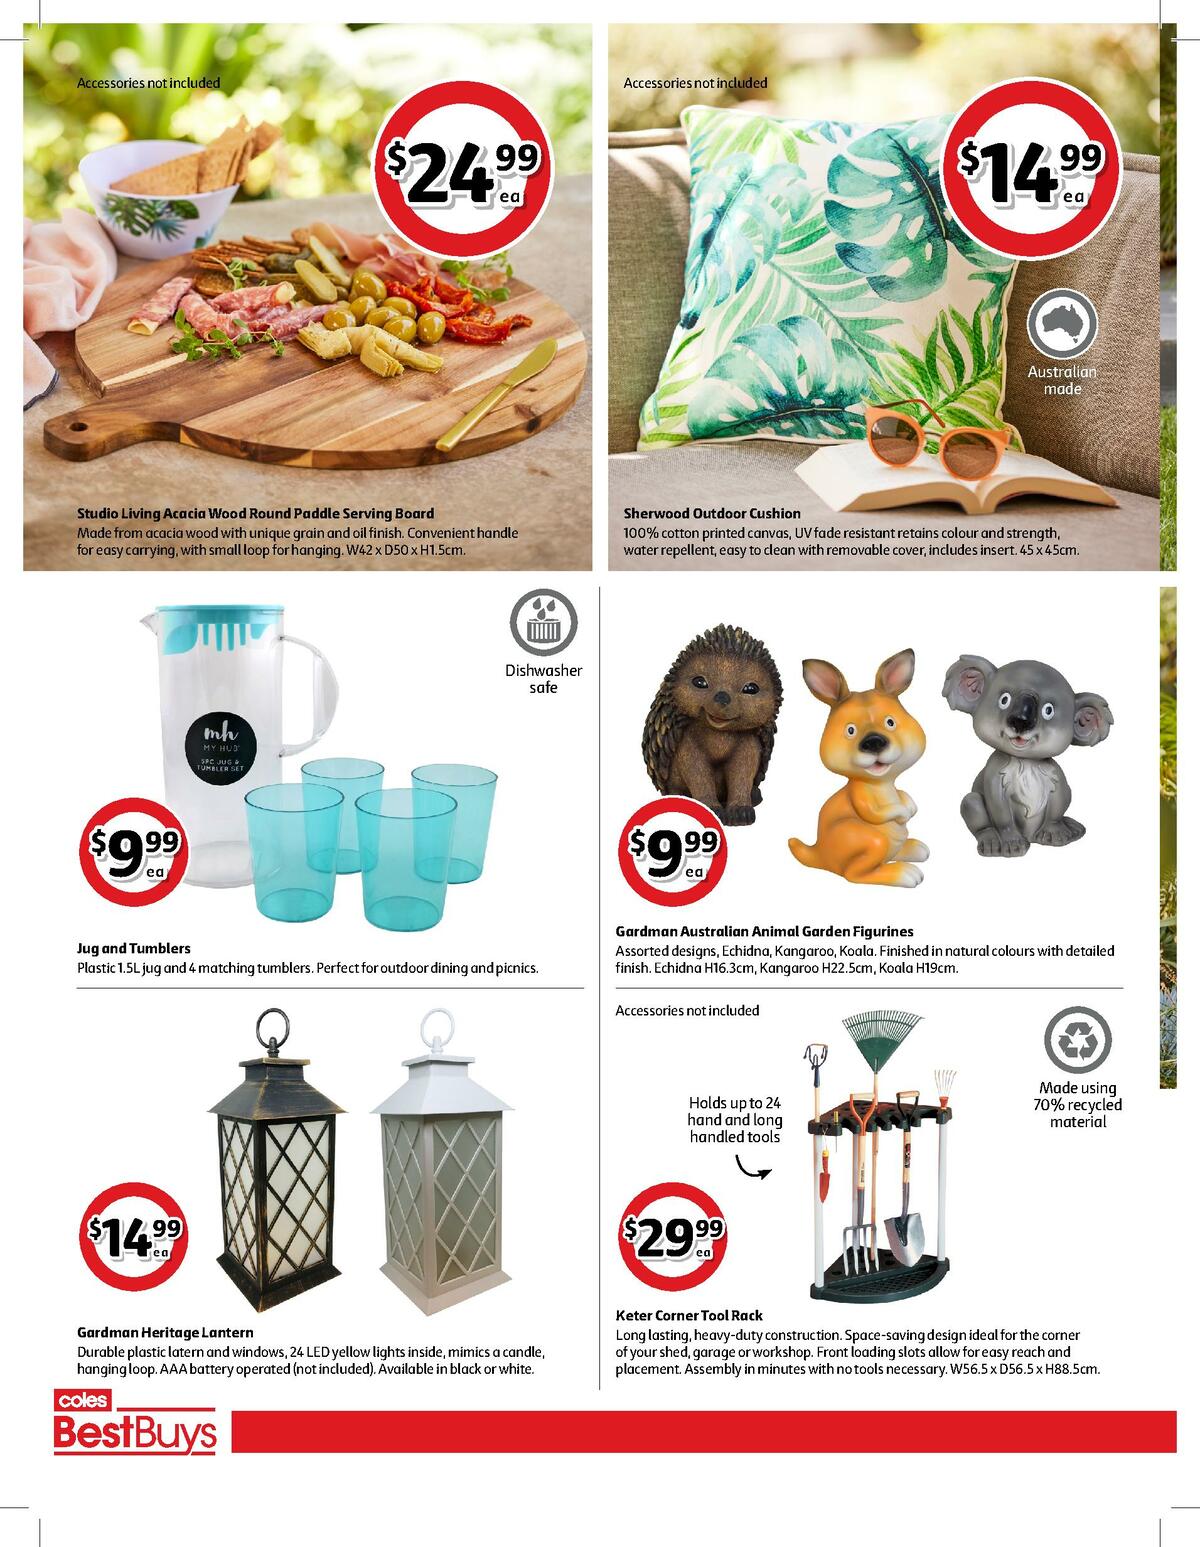 Coles Best Buys Catalogues from 22 January